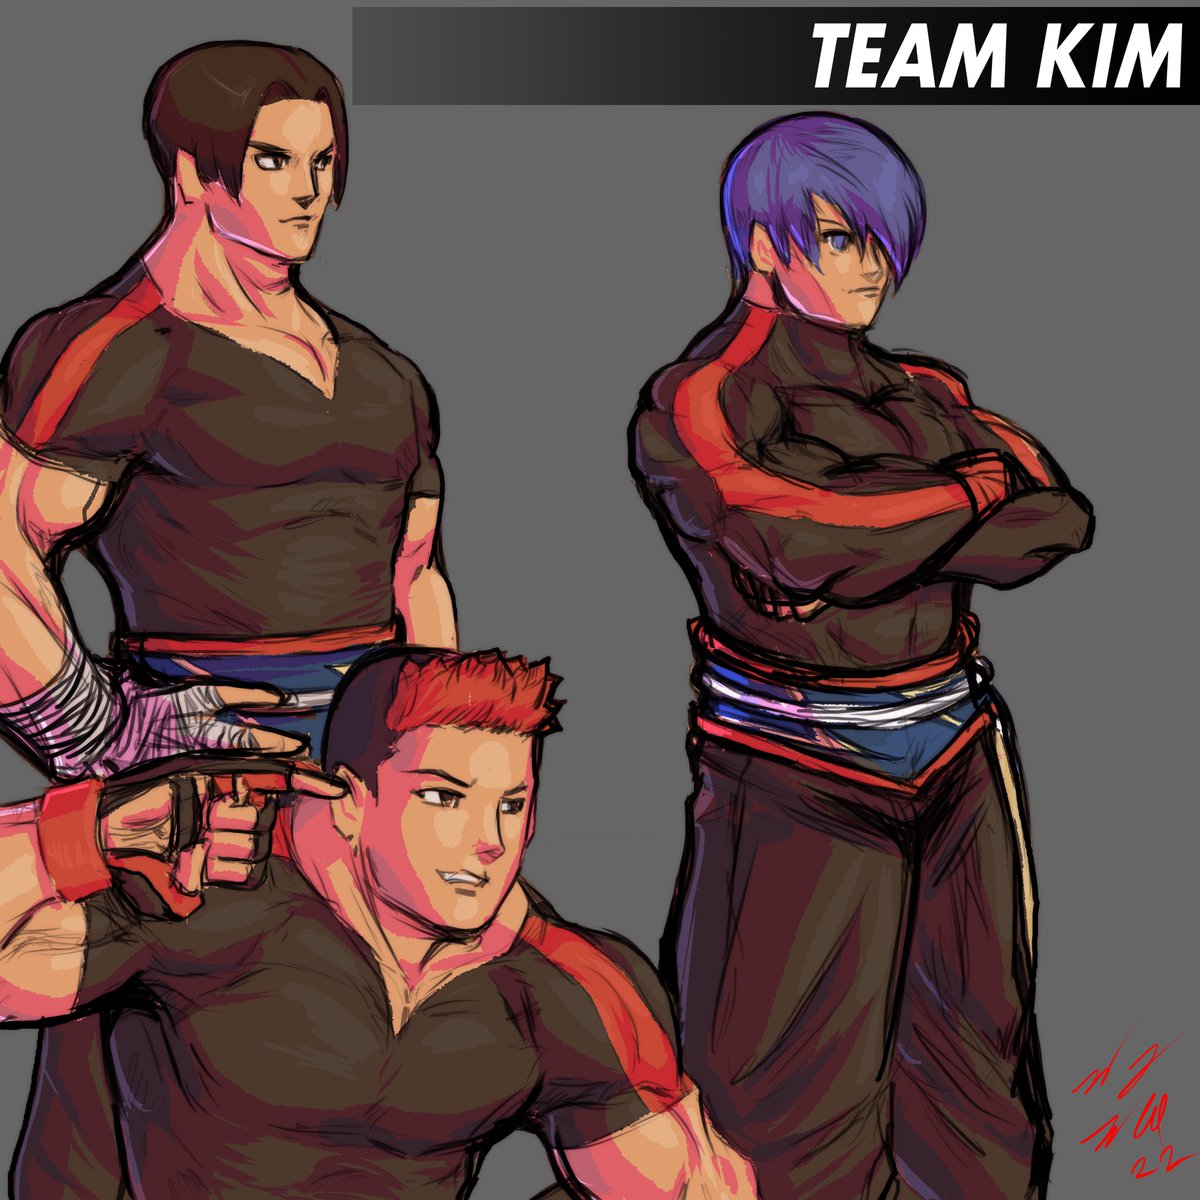 Team Kim?
I get why others want them as a team in XV, I don't. Just Buff kim, give him his others moves &team him up with someone who isn't just a EX kim.
#kimkaphwan #kimdonghwan #kimjaehoon #fatalfury #kingoffighters #kofxv #drawing #illust #clipstudio #格ゲーキャラ描こうぜ